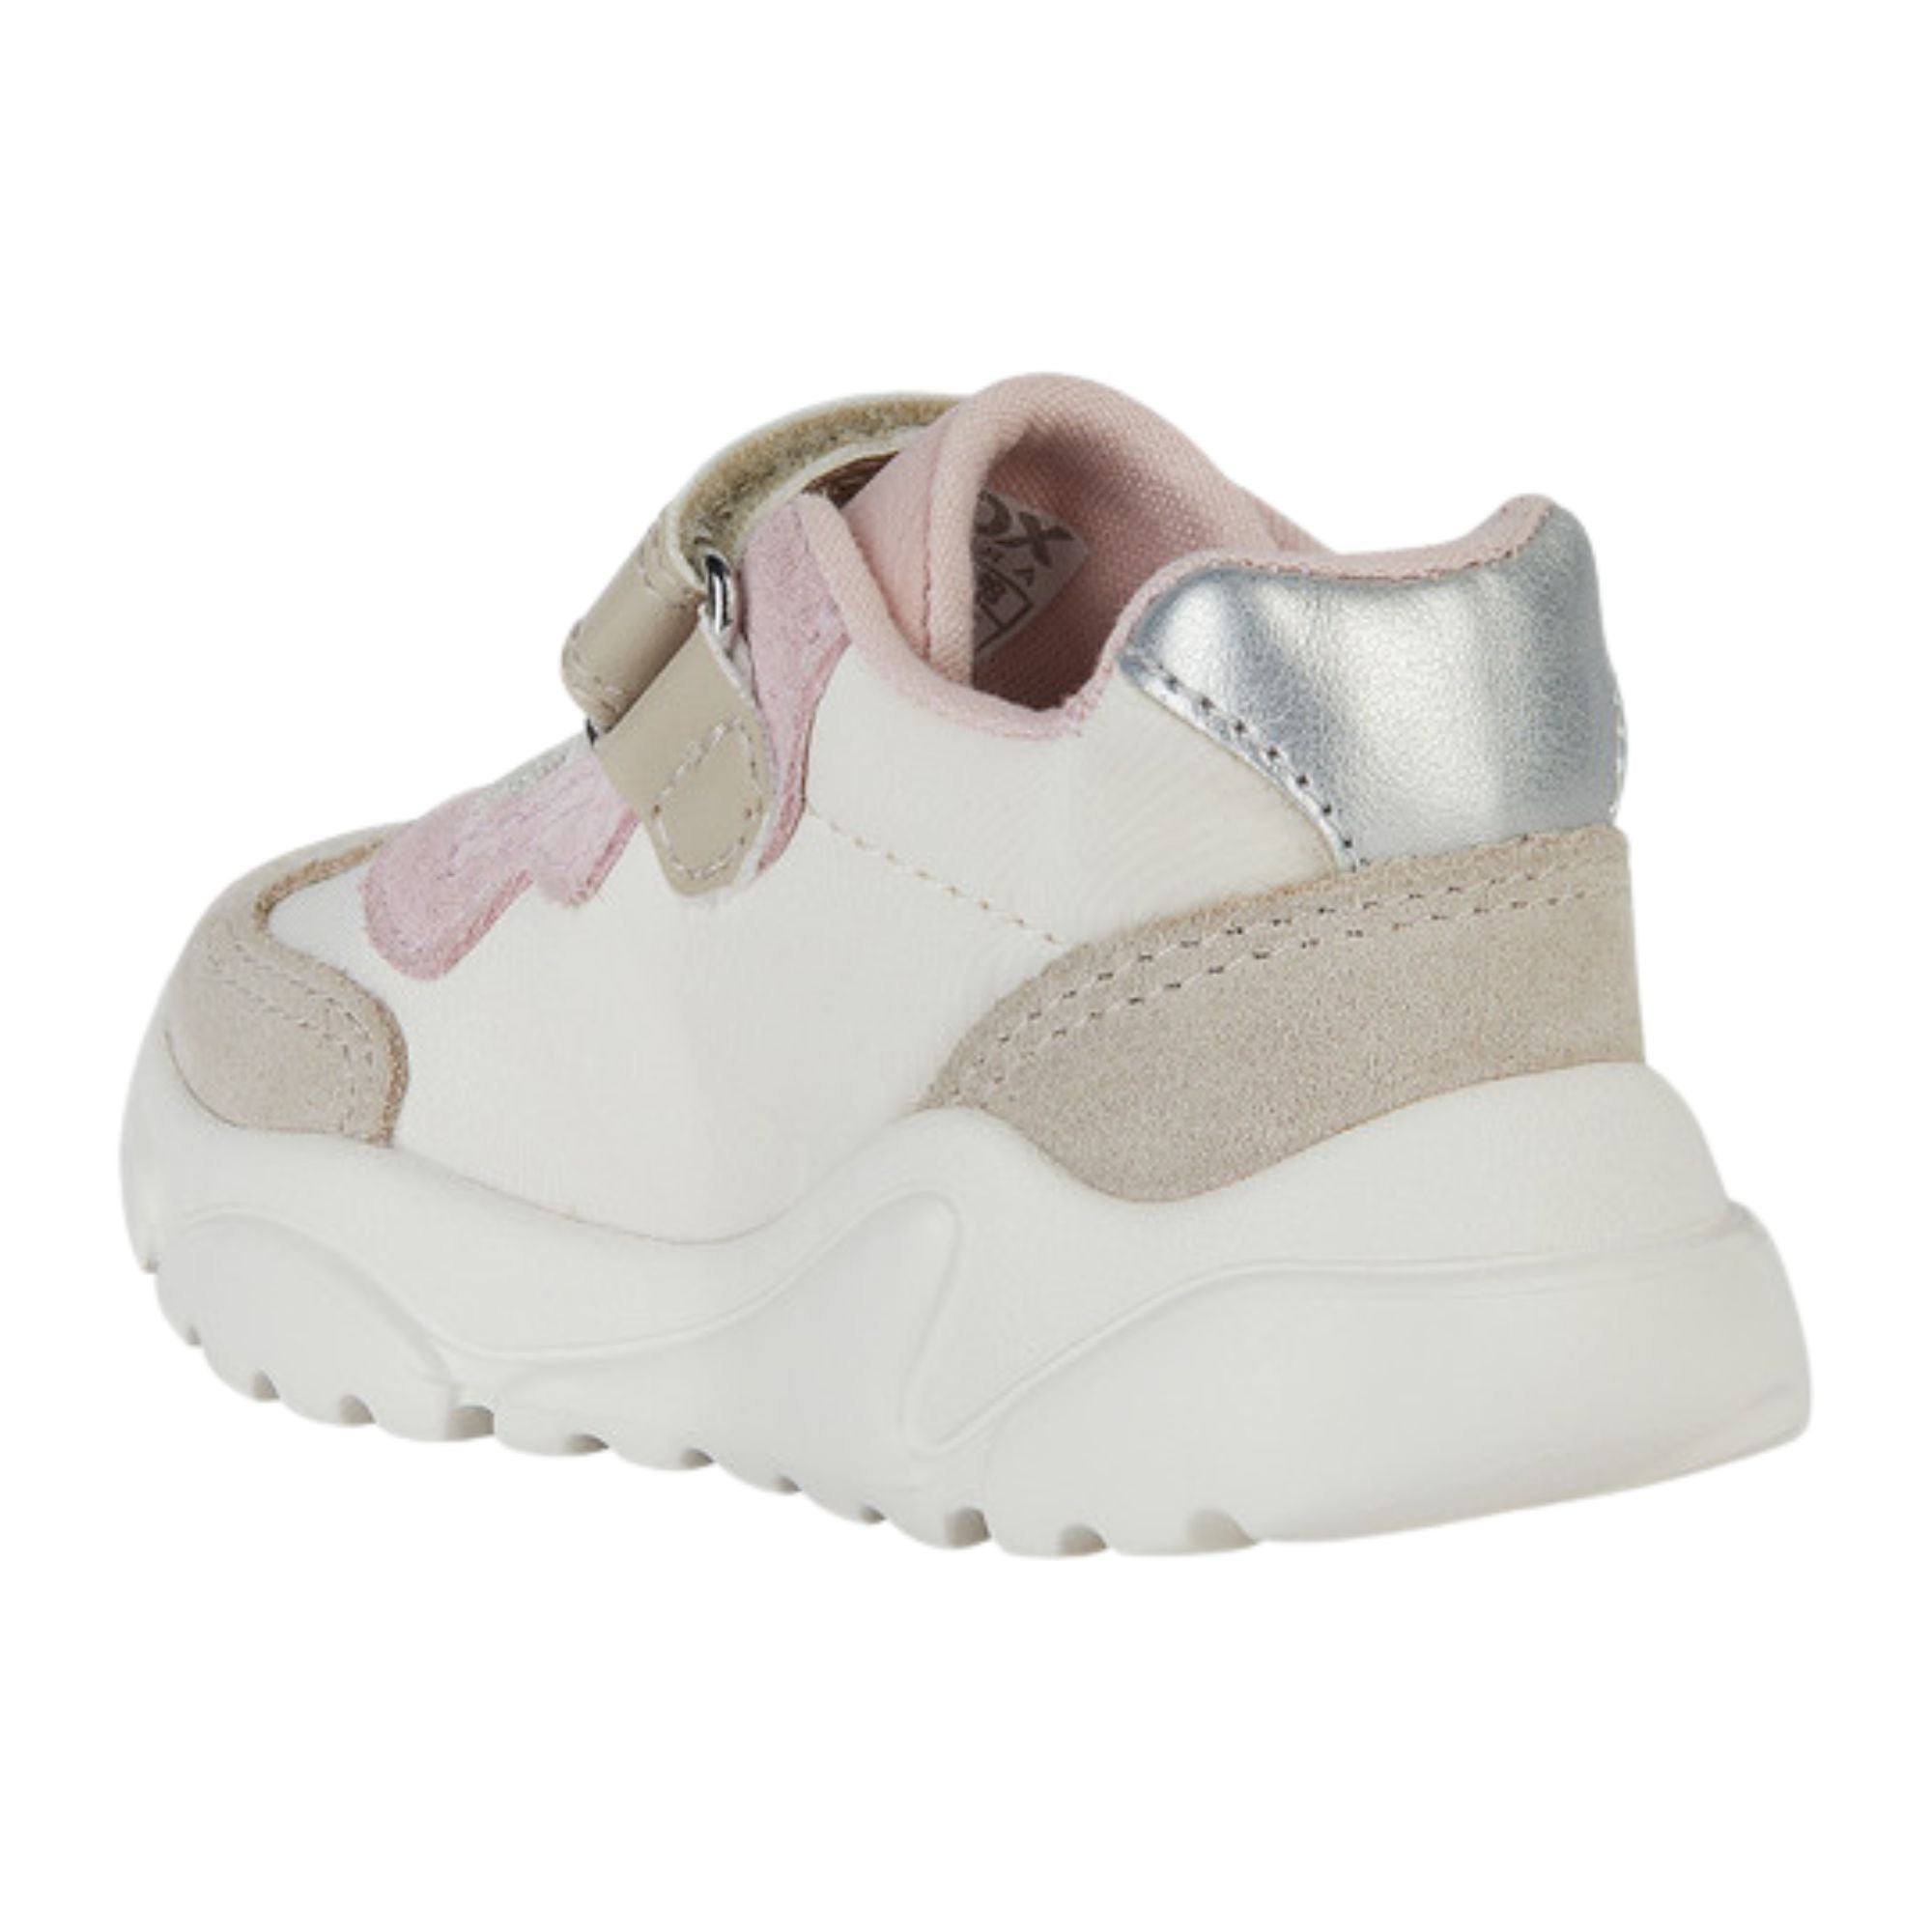 Geox Baby Girl Ciufciuf Ivory Sneakers